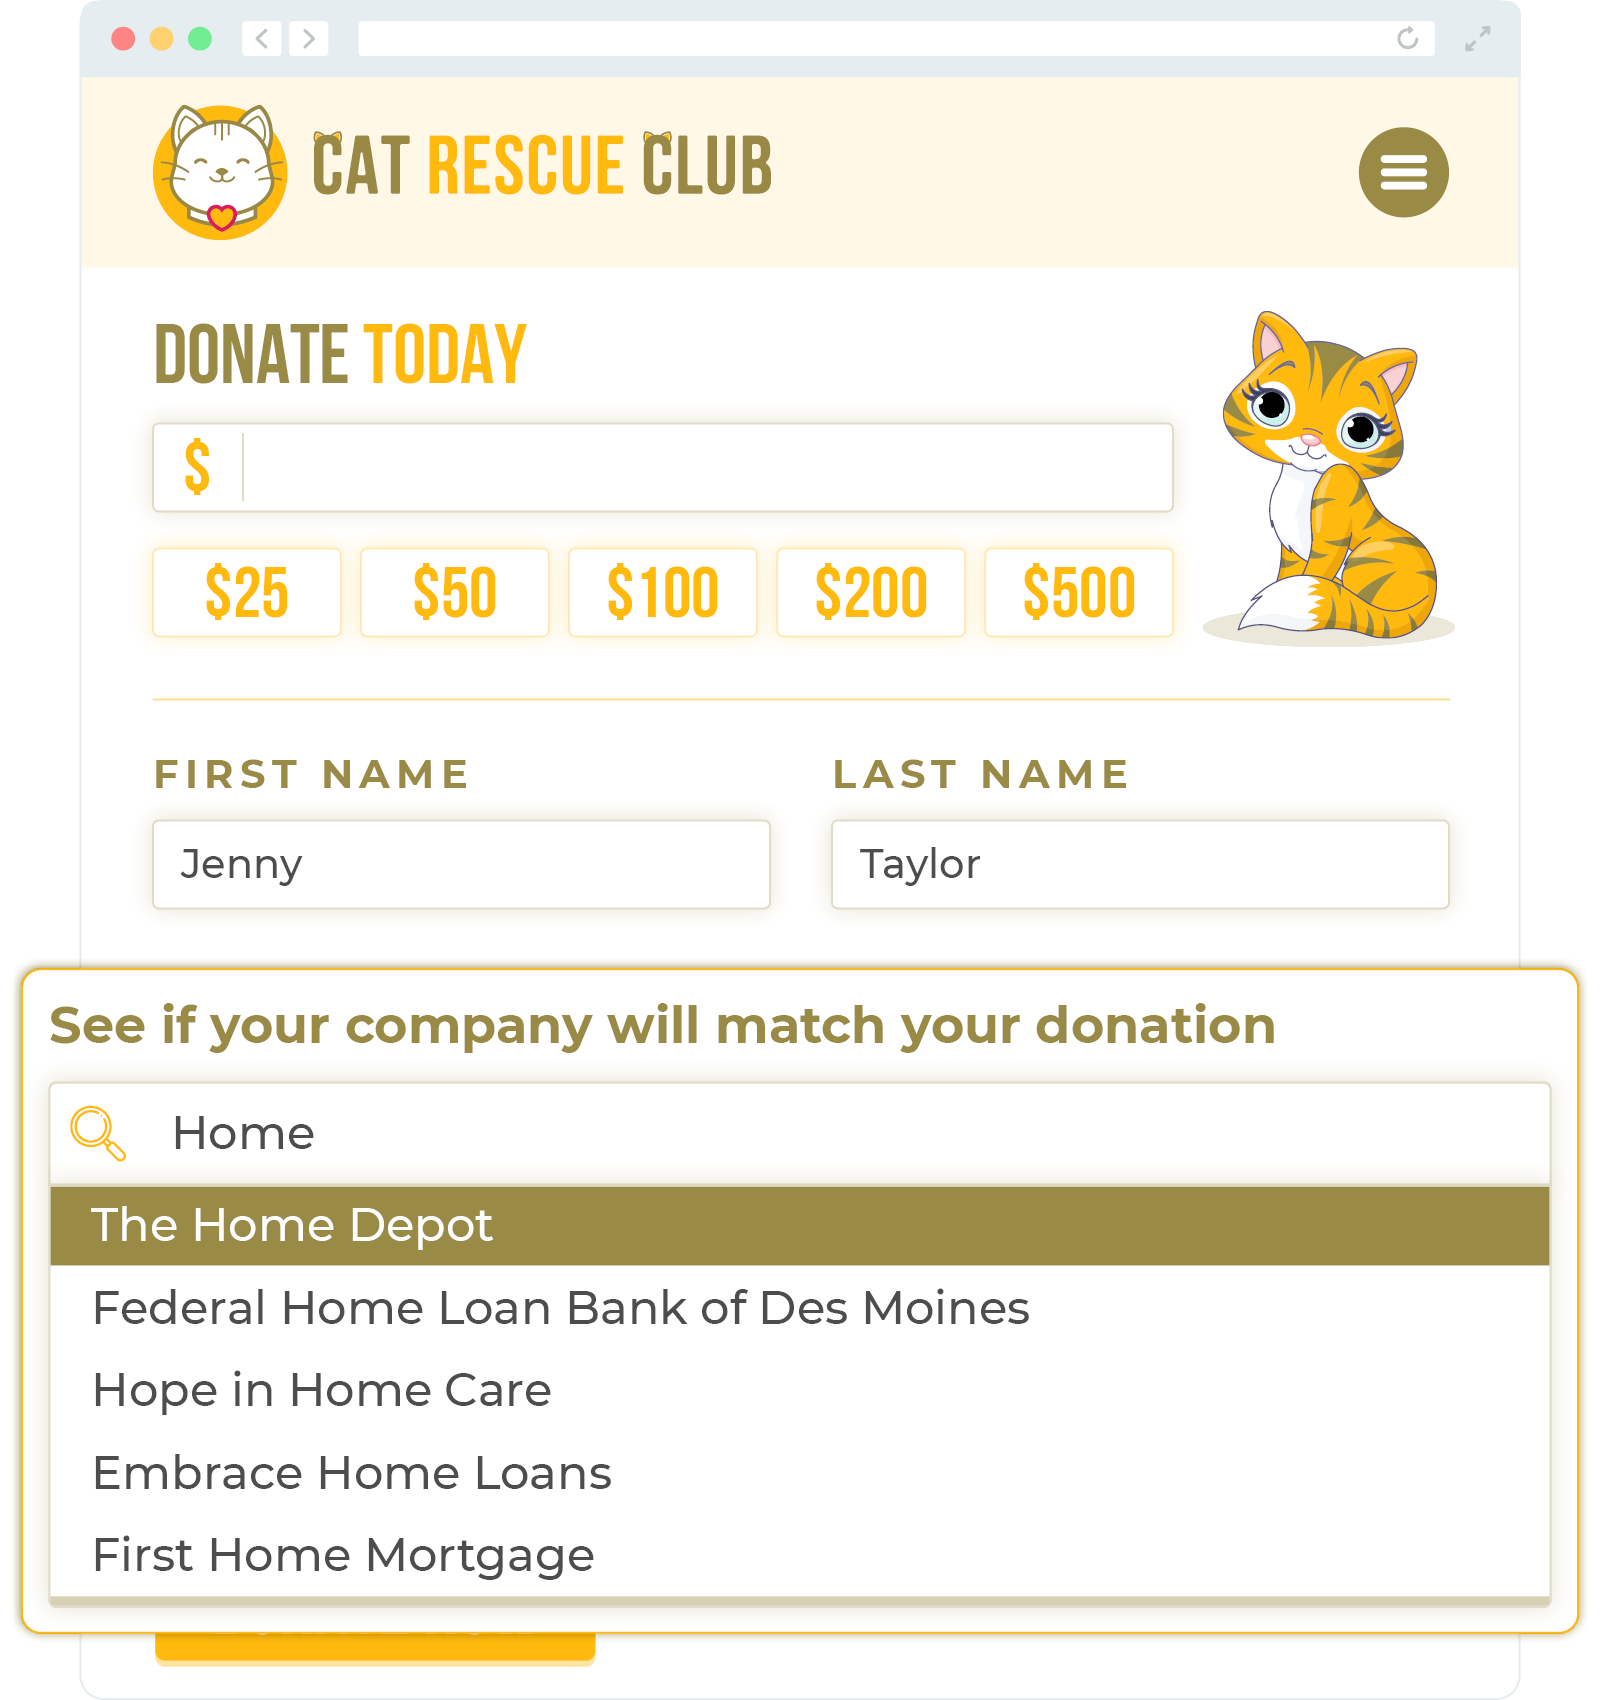 Donation Form Requirement 2 (streamlined search field must autocomplete donor-entered text)